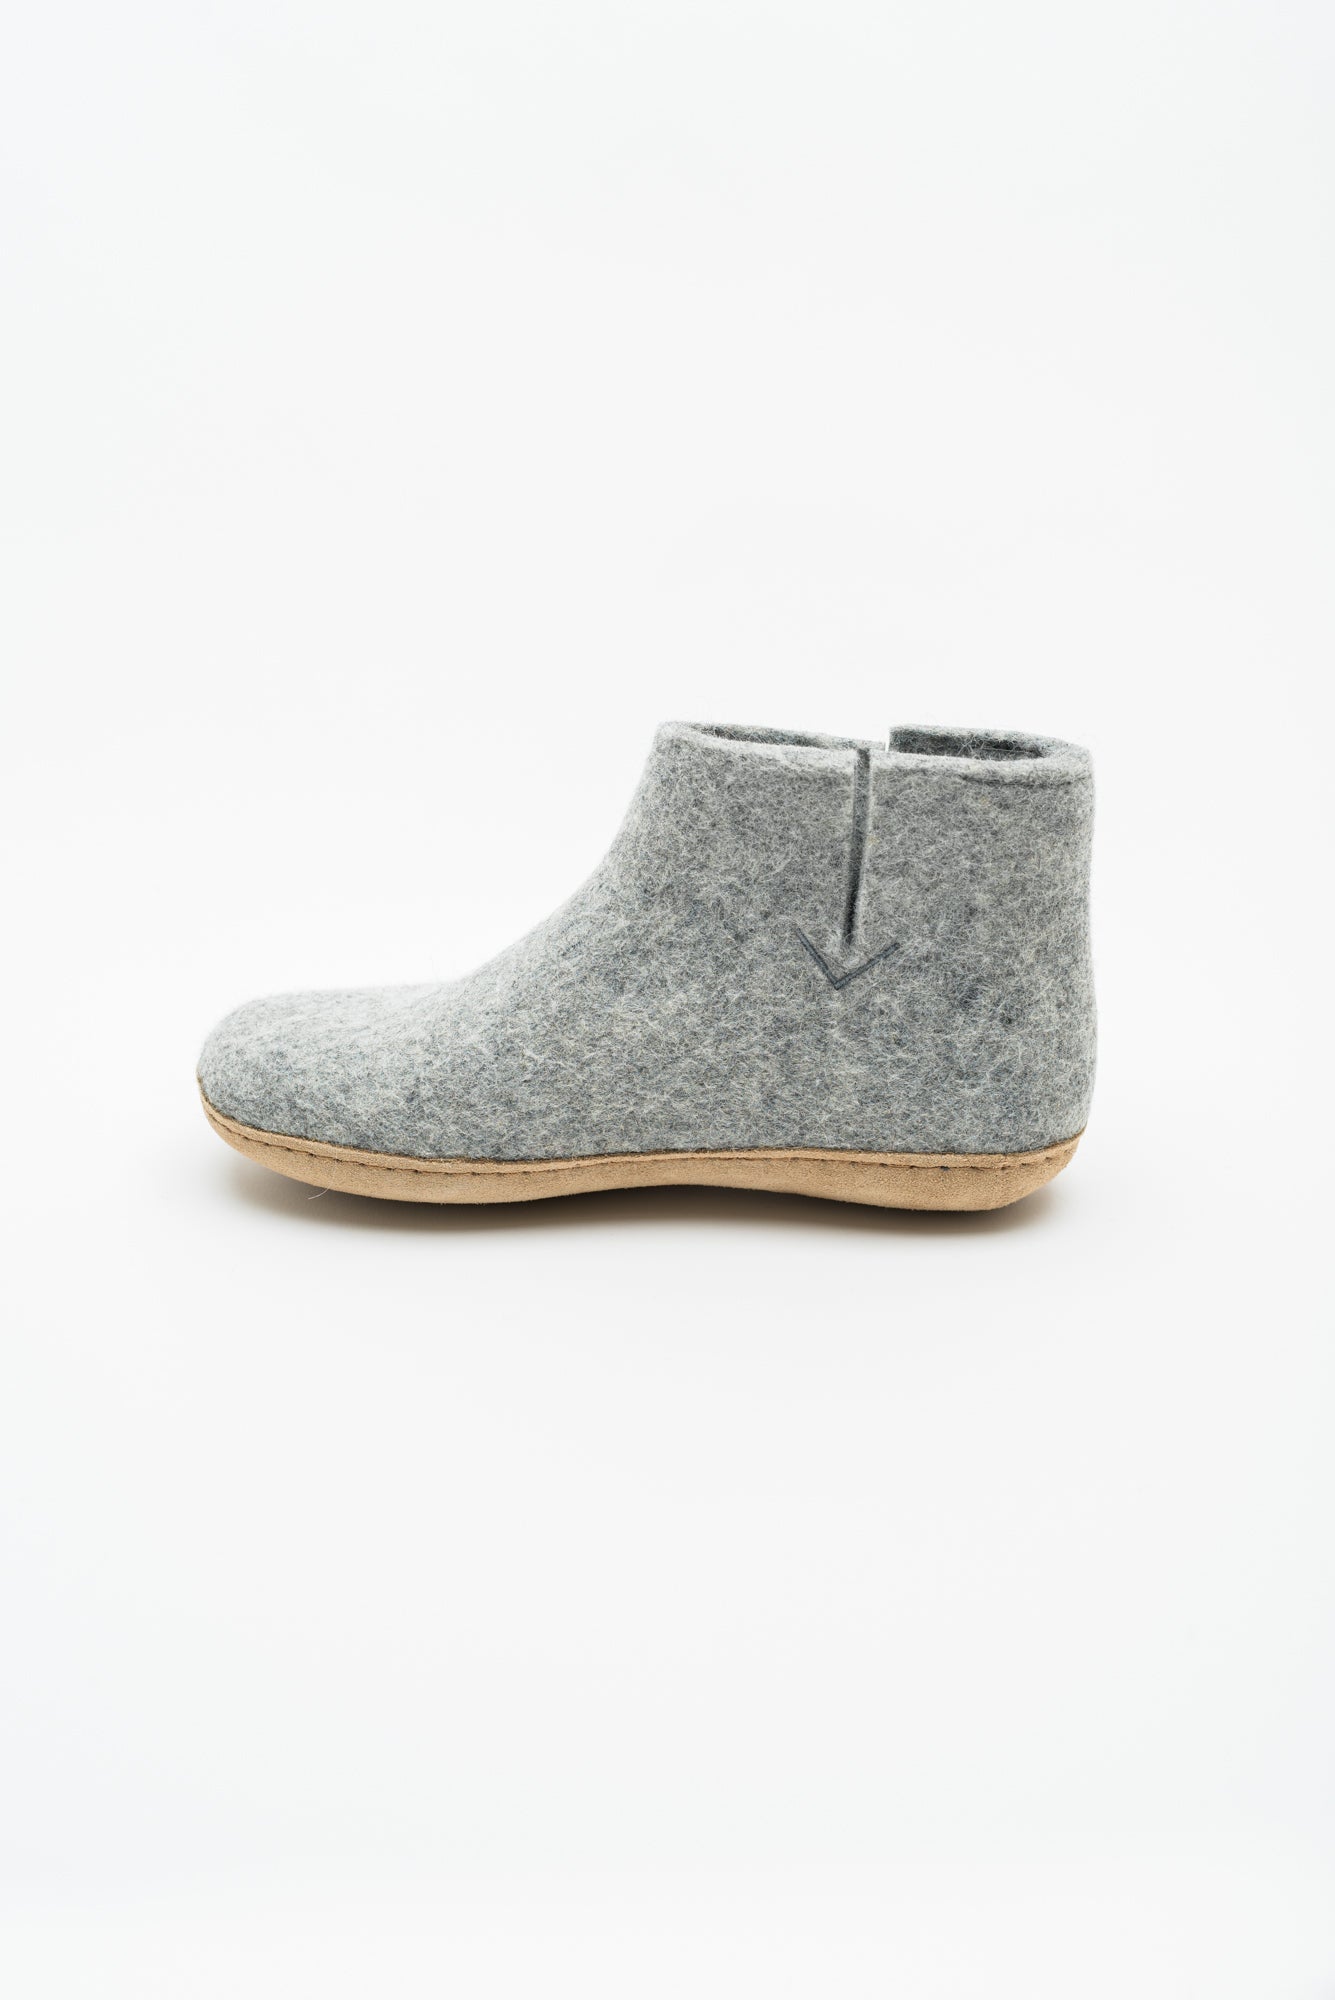 Load image into Gallery viewer, Glerups Low Boot with Leather Sole - Grey
